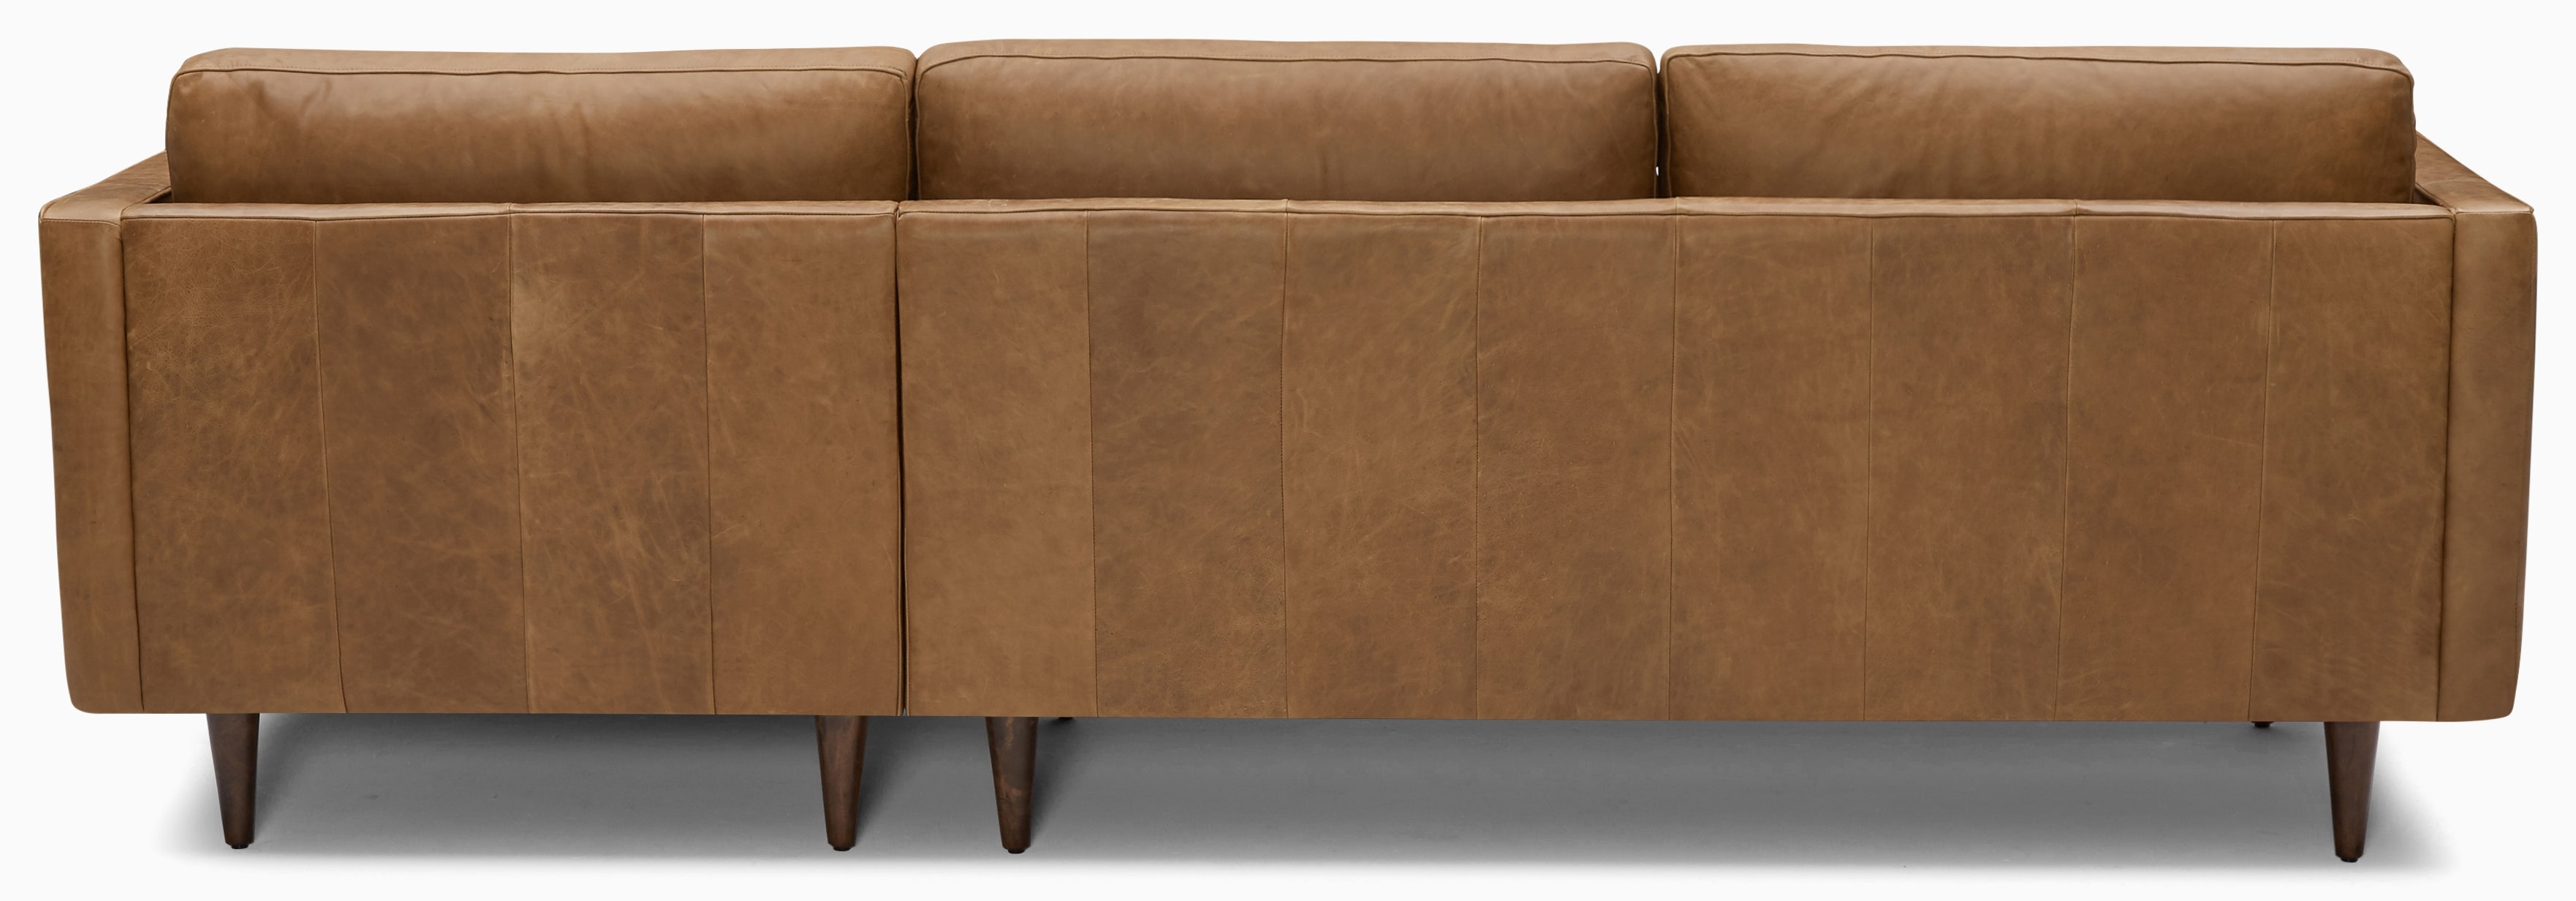 Briar Leather Sectional - Image 2